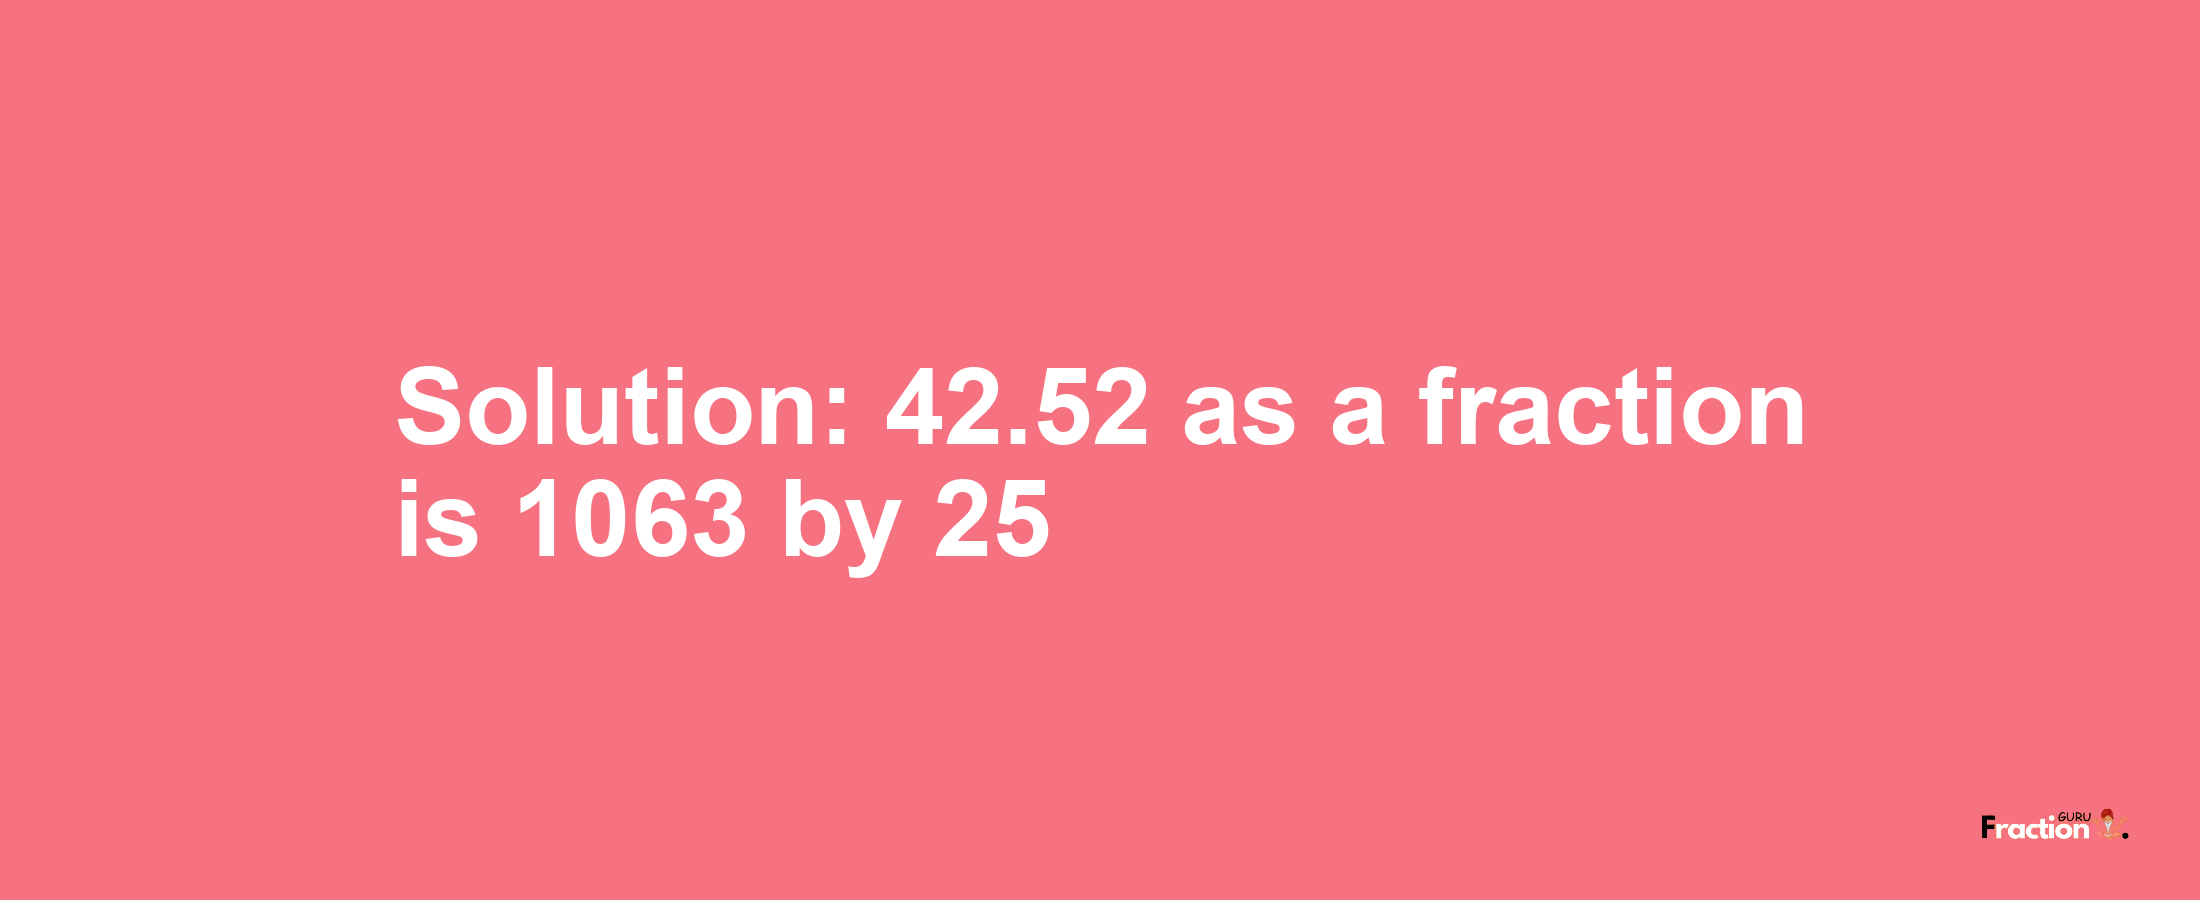 Solution:42.52 as a fraction is 1063/25